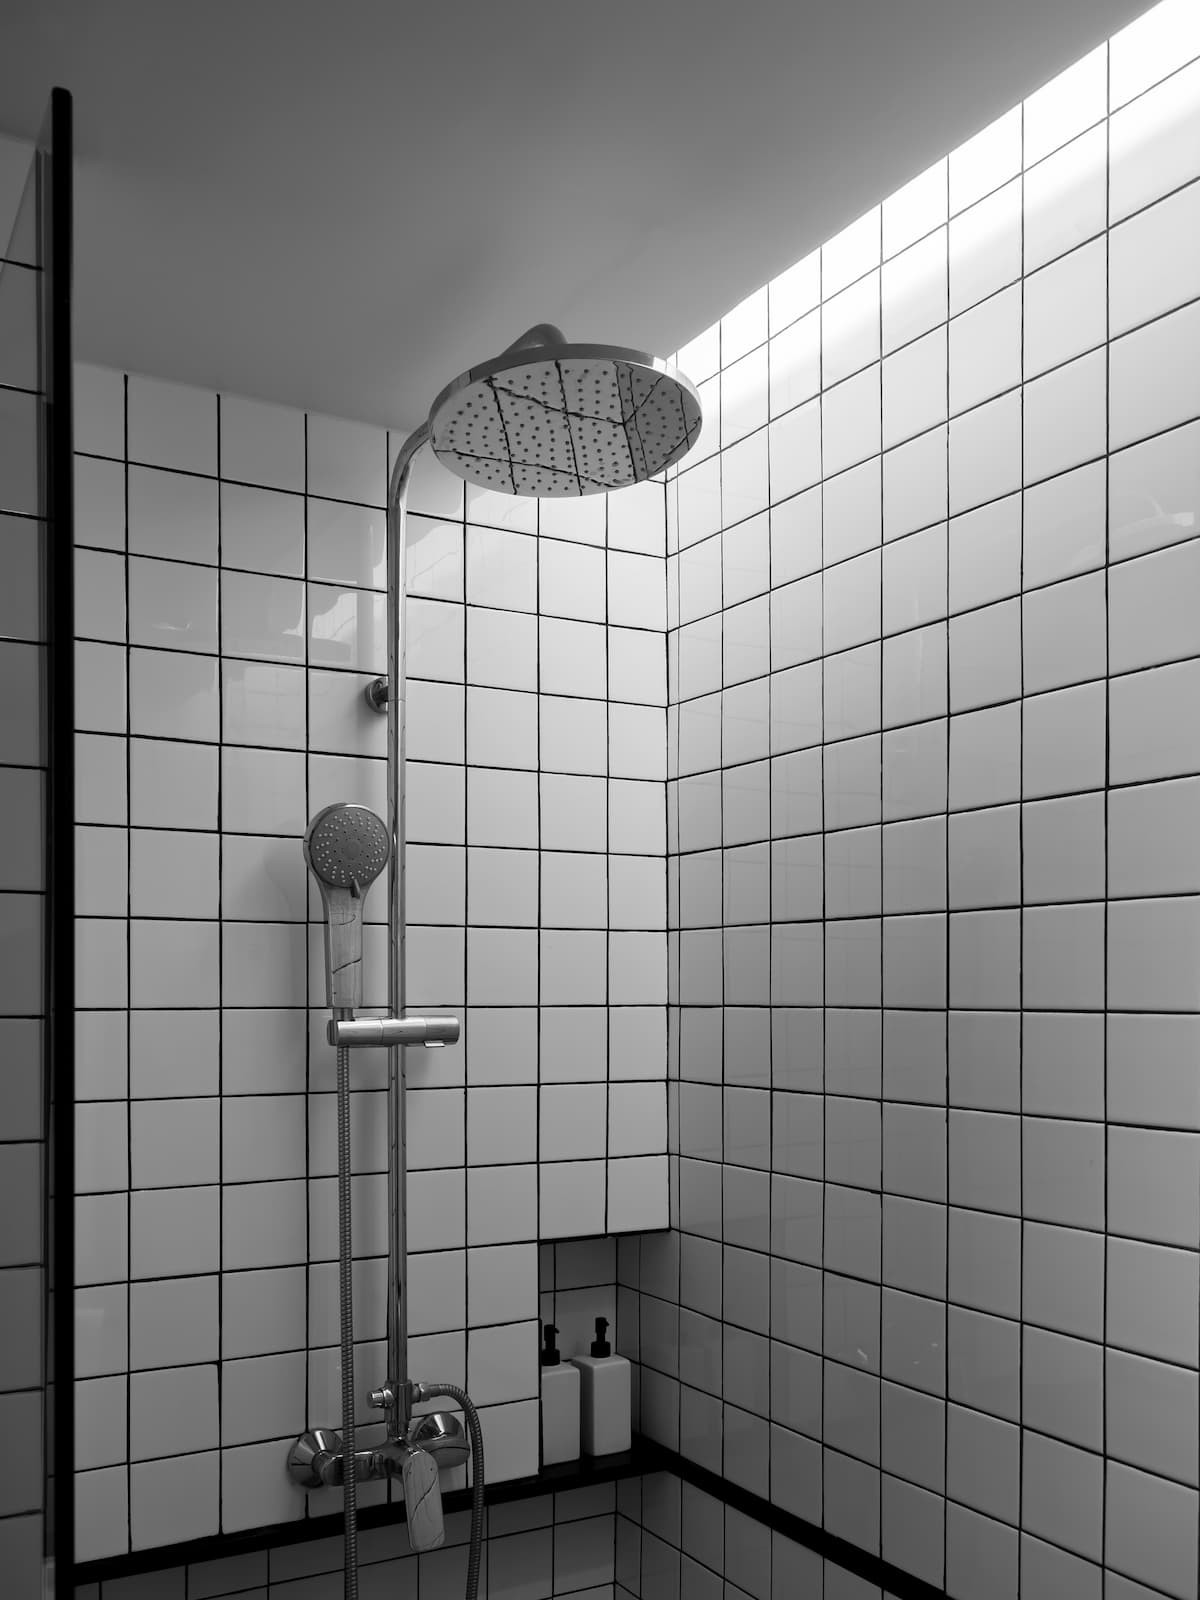 Basic White Tiles With Black Grout on Walls